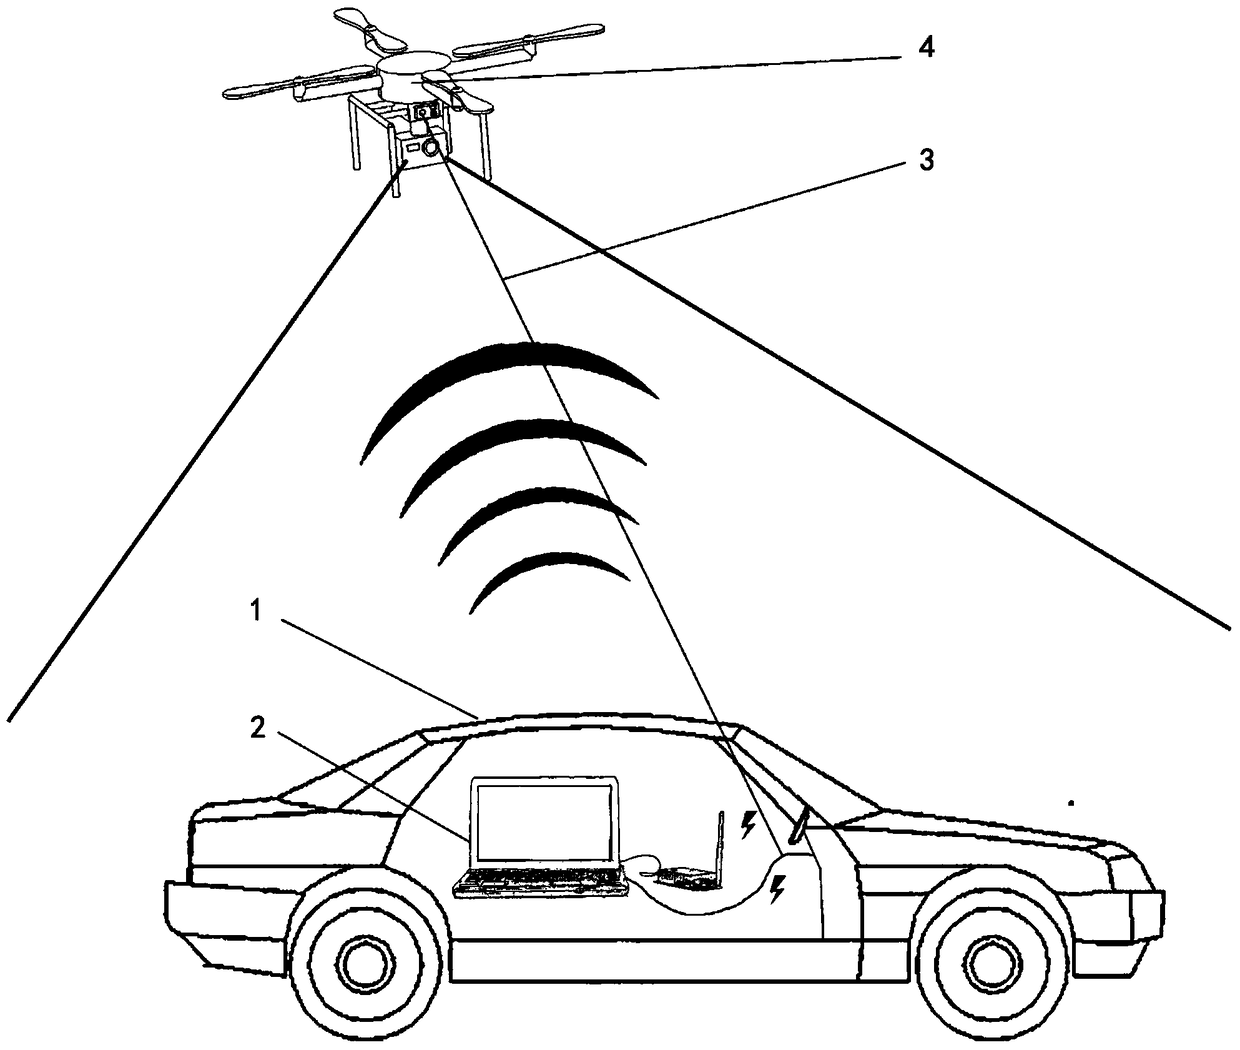 Path planning method for unmanned vehicles based on UAV perception